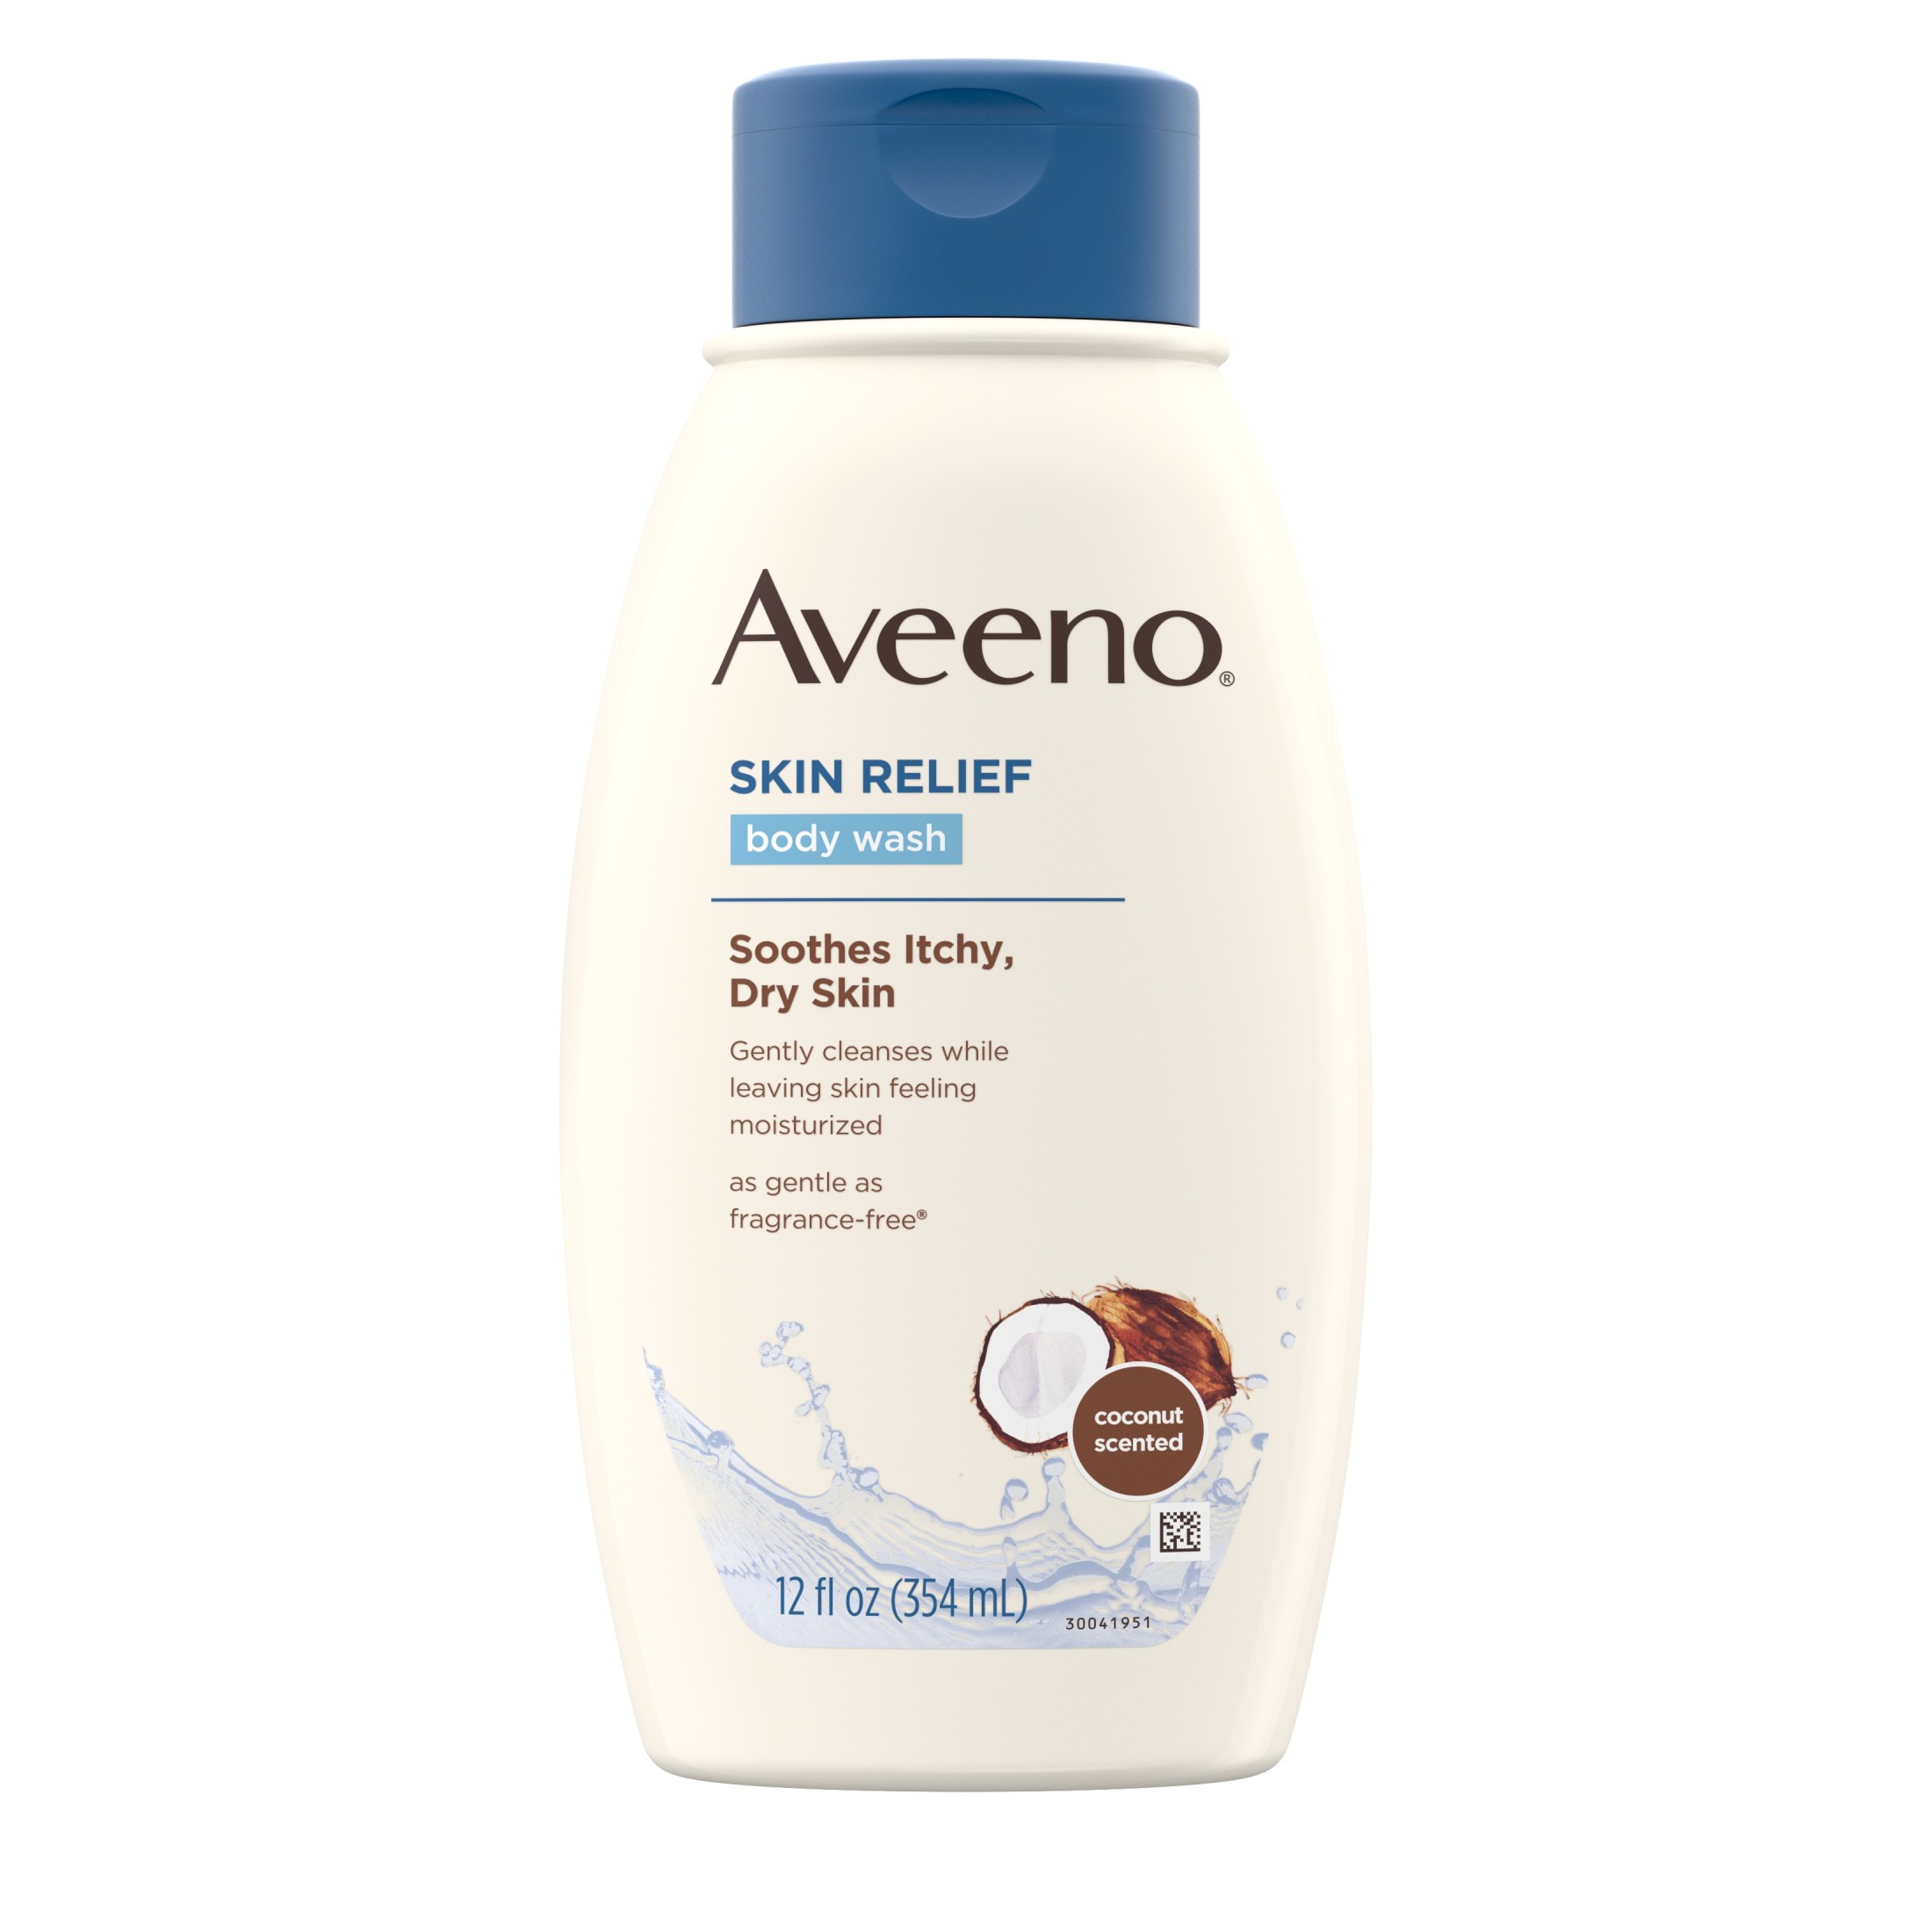 Aveeno Skin Relief Oat Body Wash with Coconut Scent, 12 fl. oz - image 1 of 11